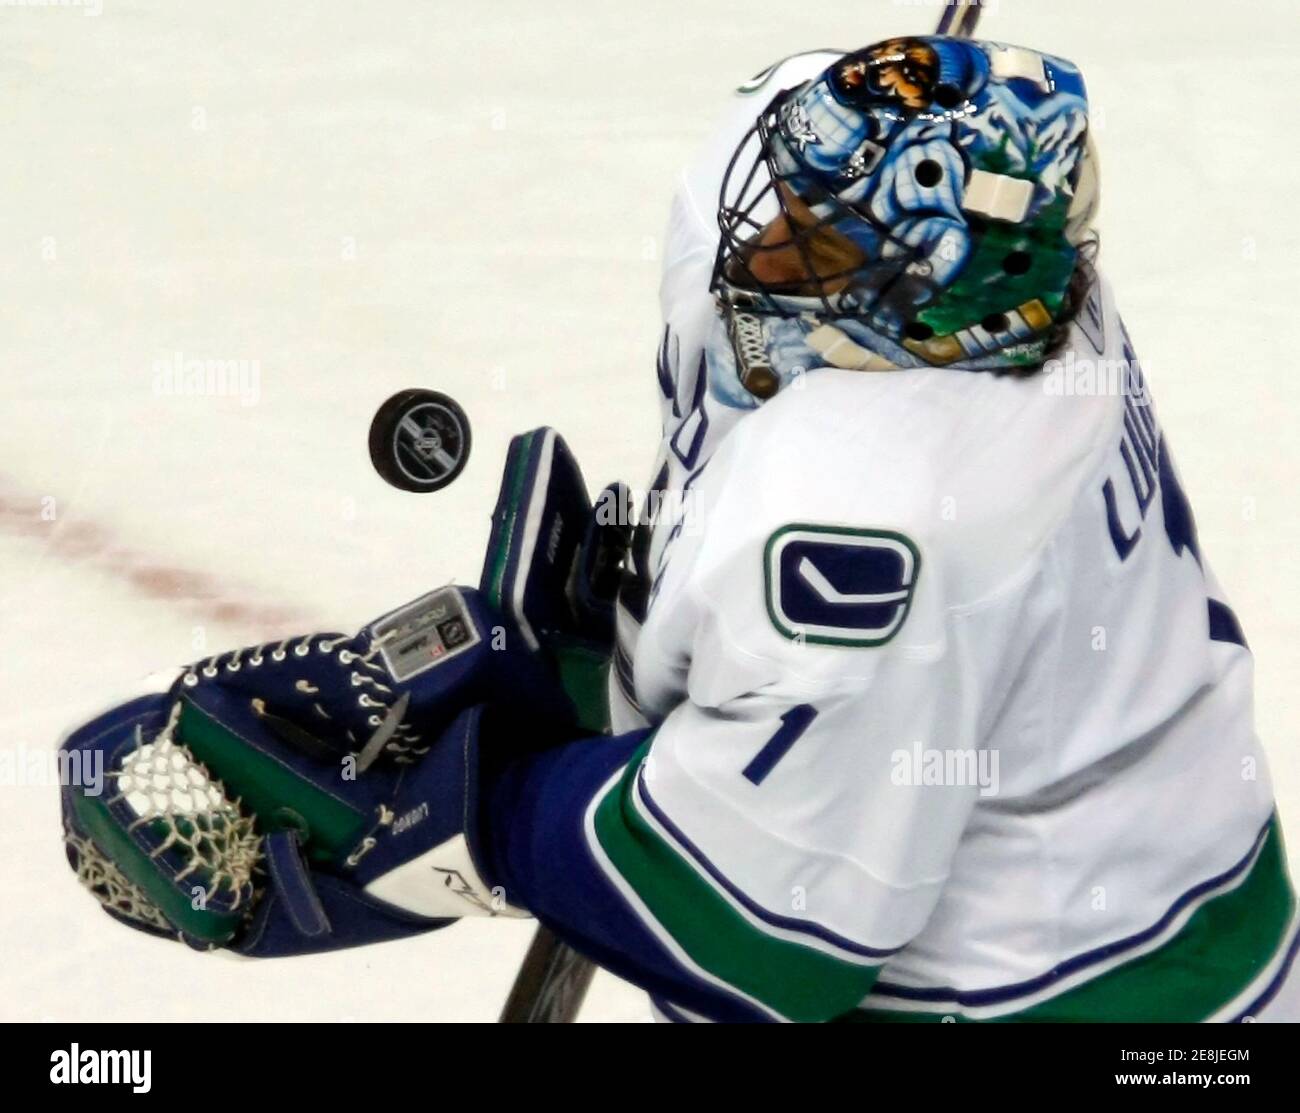 Vancouver Canucks goaltender Roberto Luongo blocks a shot on goal during the first period of their NHL hockey game against the Colorado Avalanche in Denver November 3, 2007. REUTERS/Rick Wilking (UNITED STATES) Stock Photo